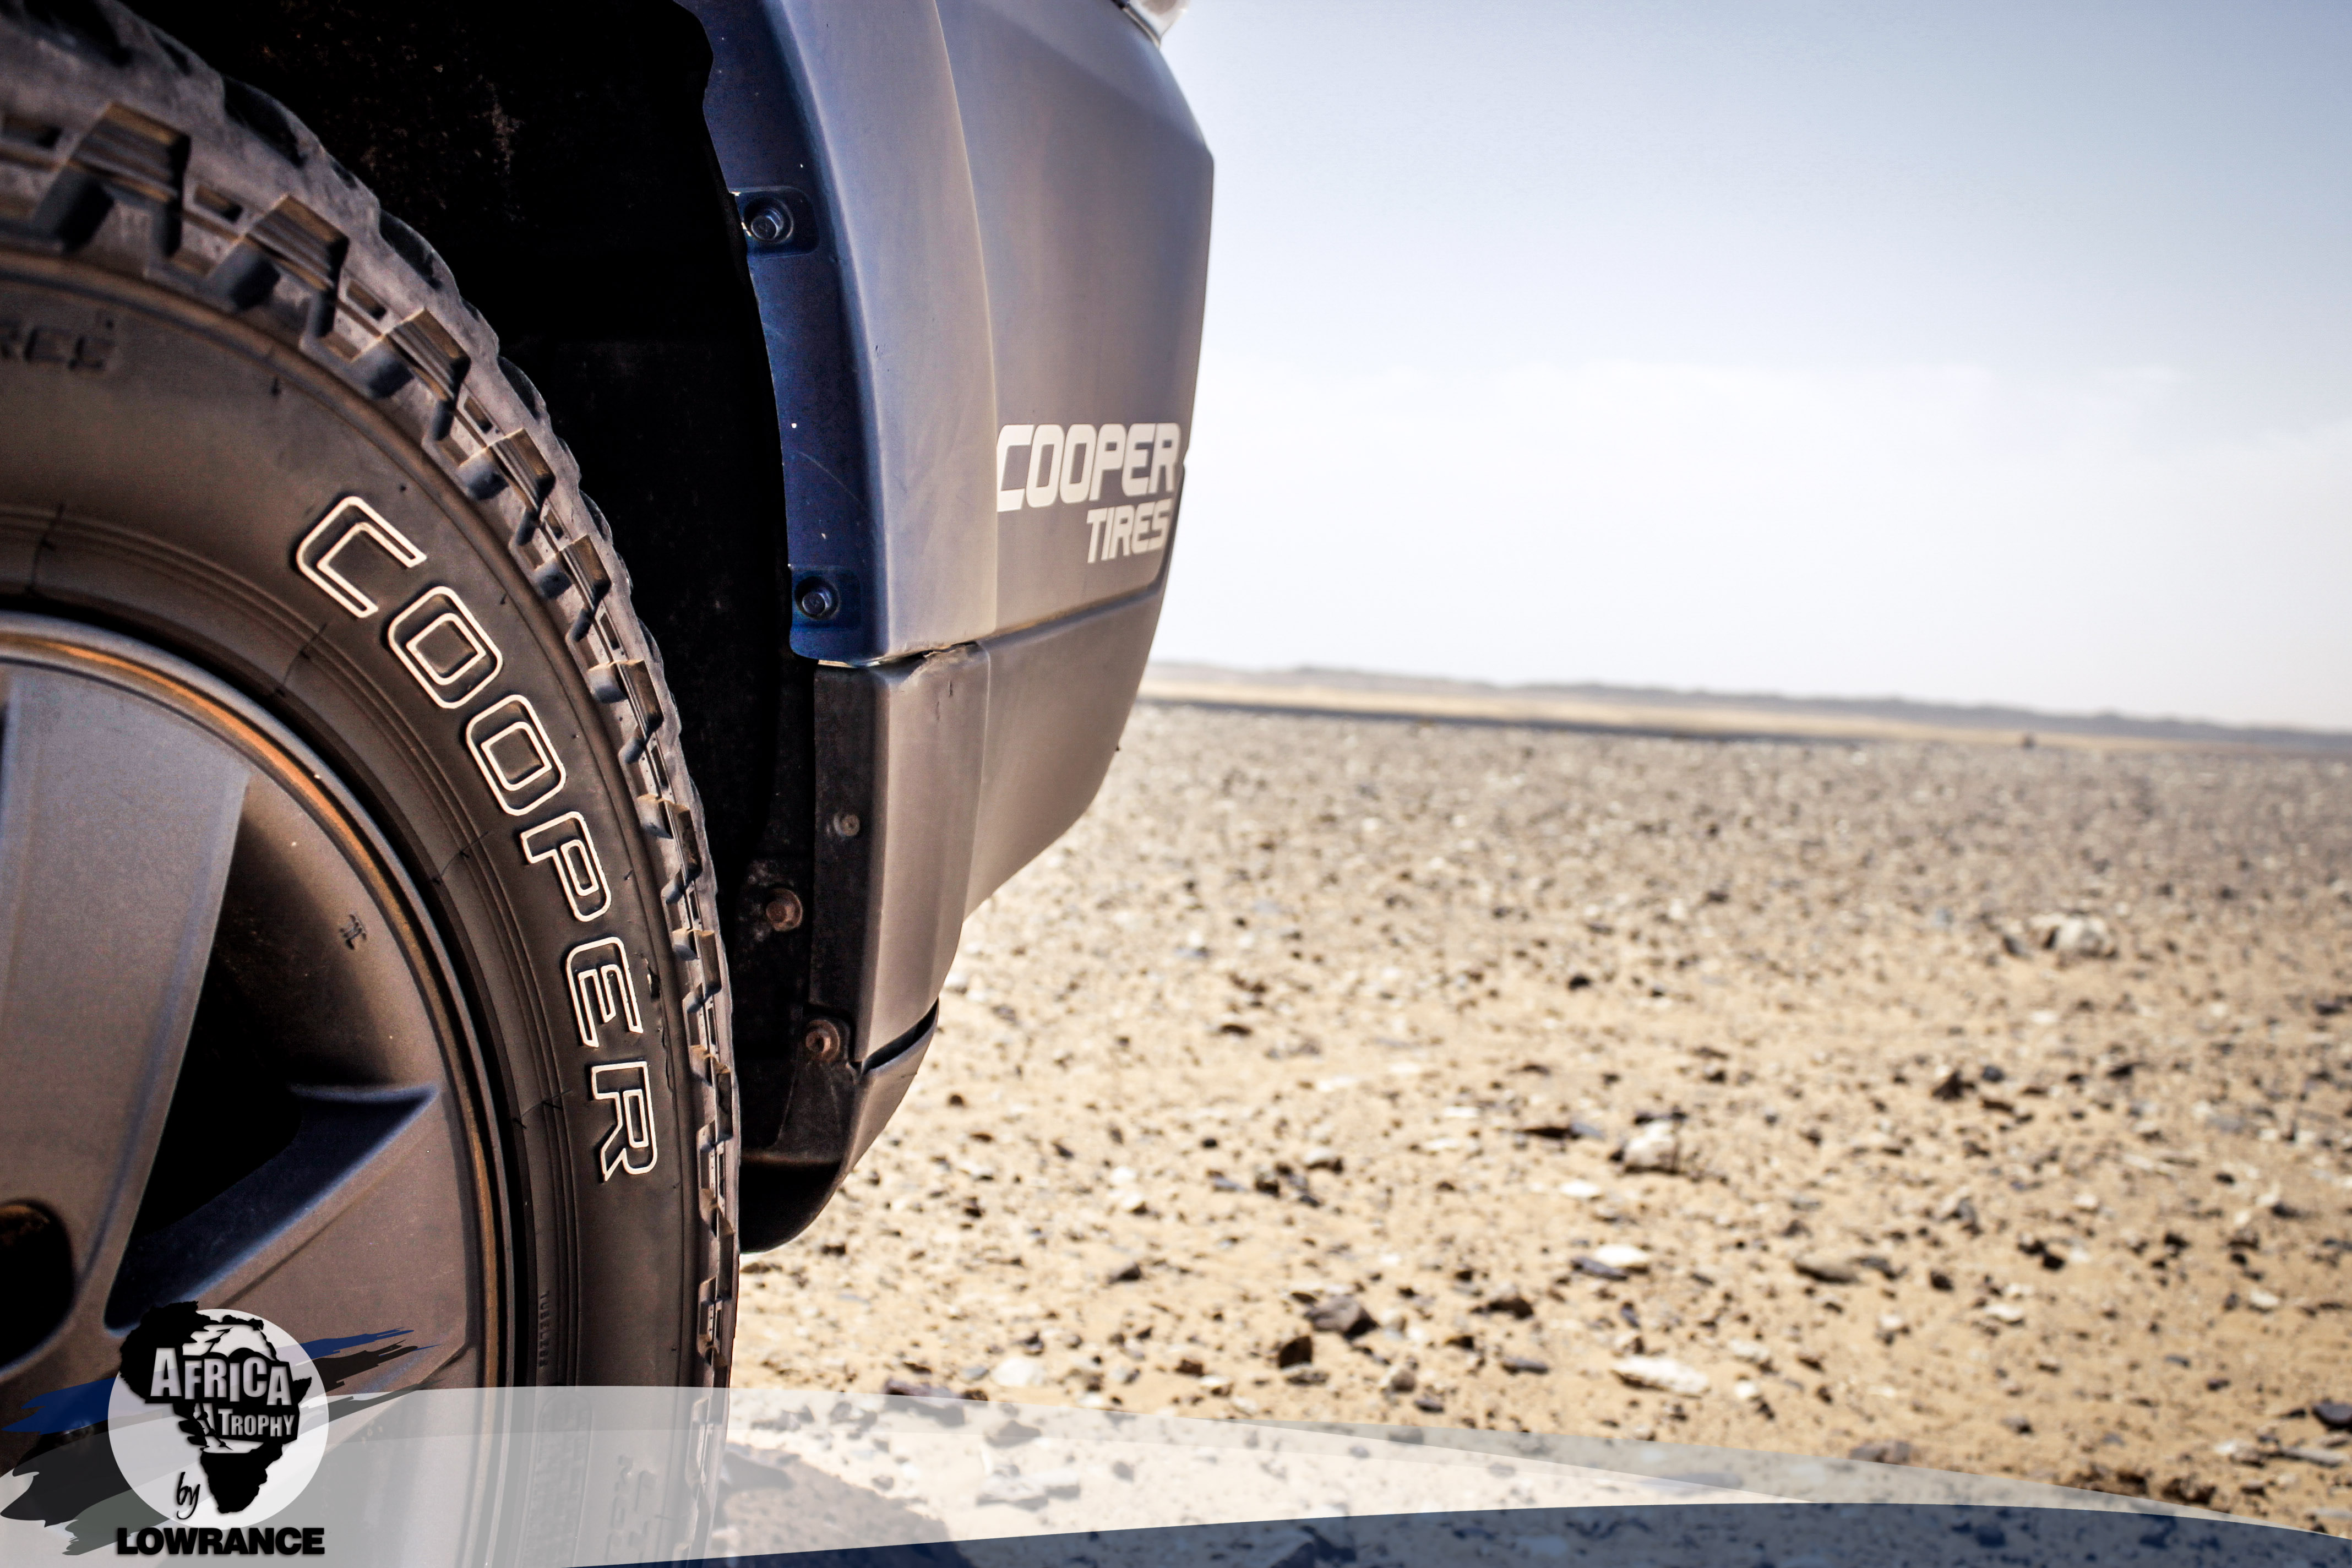 You are currently viewing Cooper Tires, neumático oficial del África Trophy